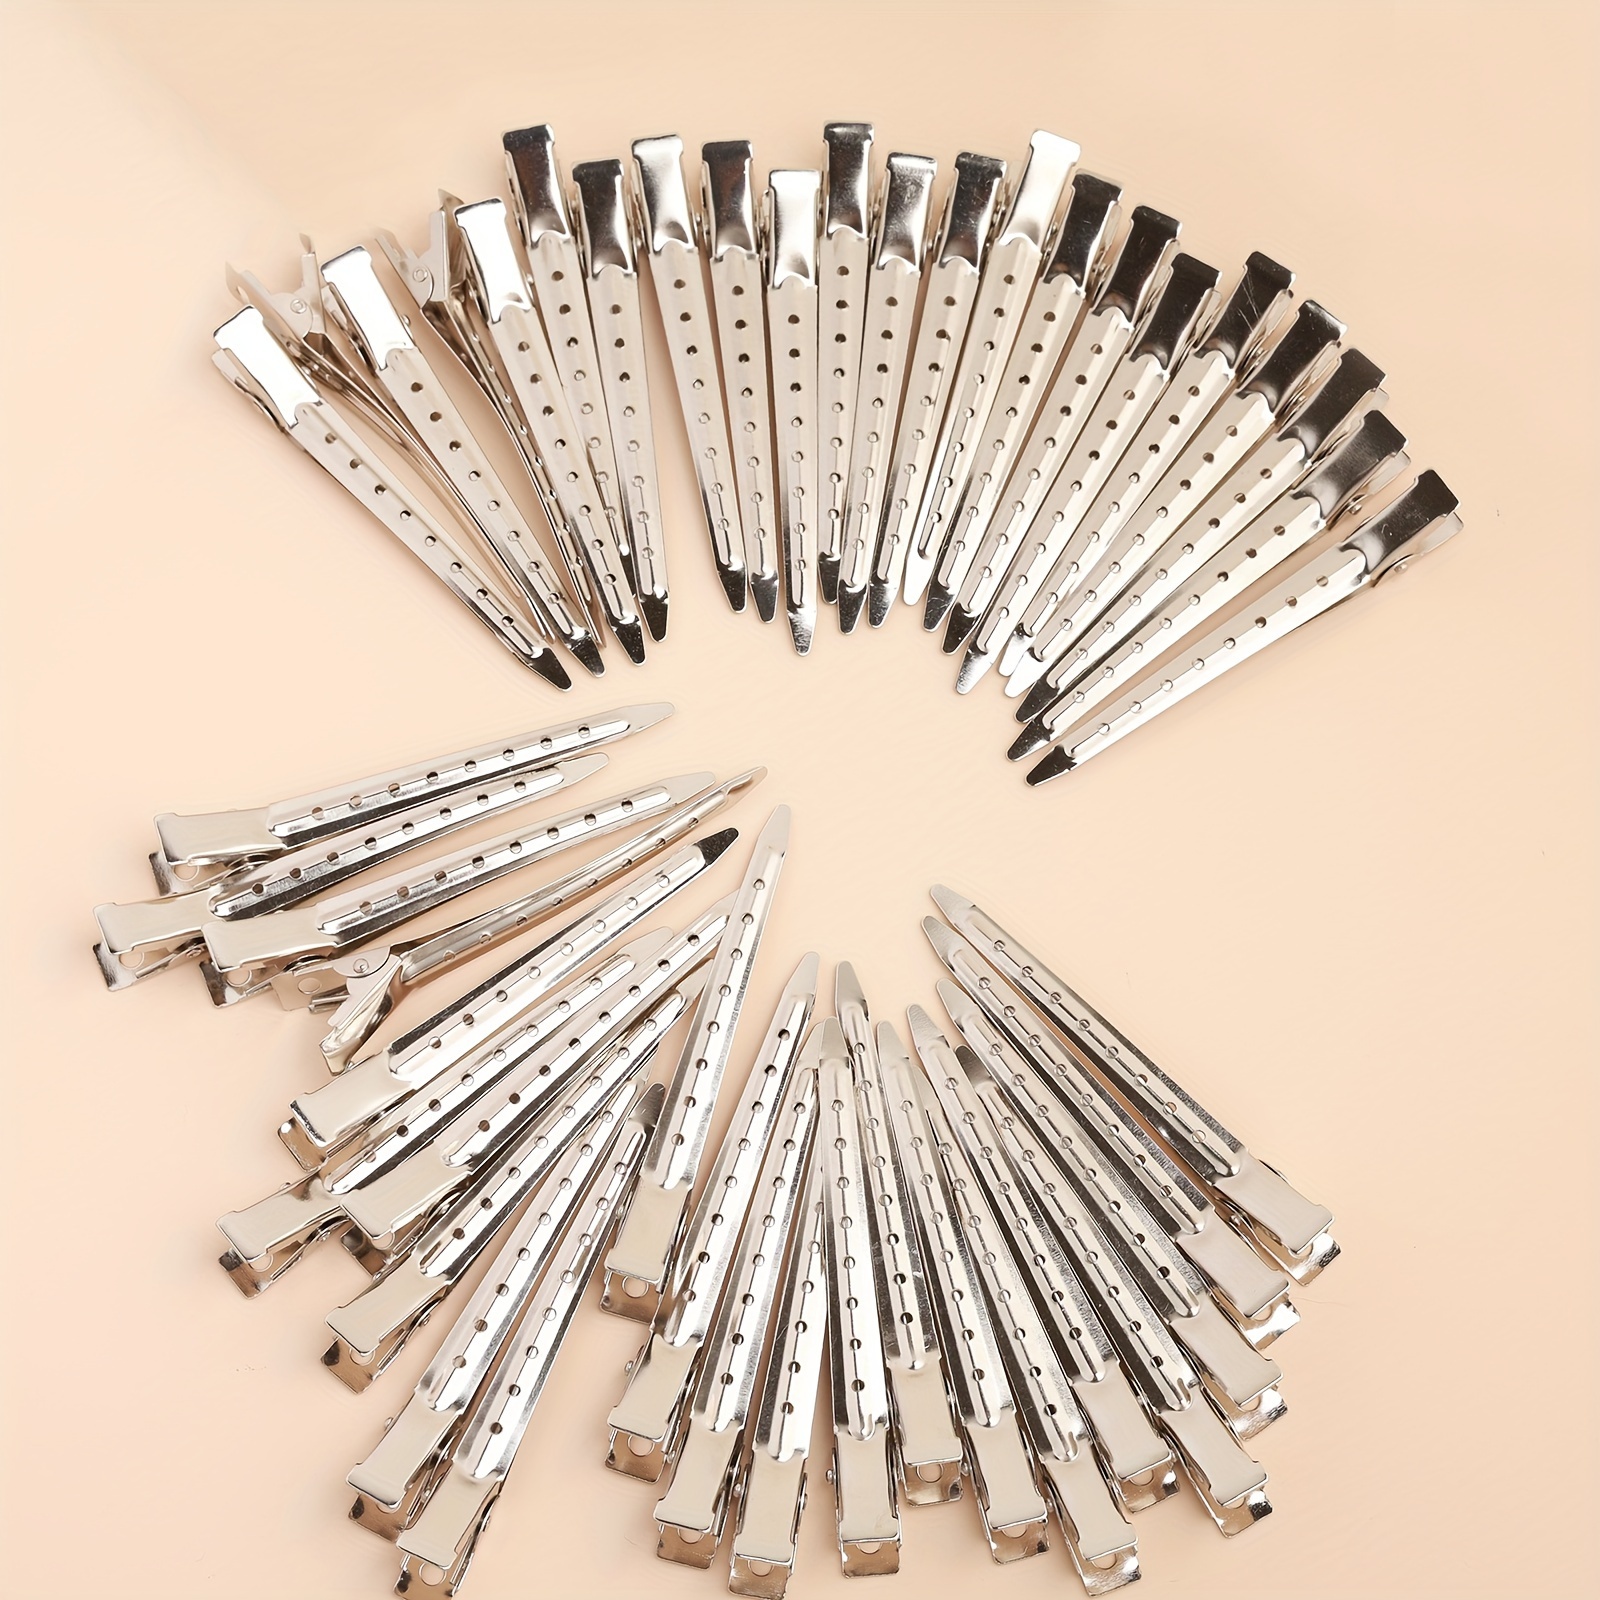 

50pcs/100pcs Non-marking Hair Clips Makeup Bangs Fixed Clip Barber Makeup Artist Clips For Hair Styling, Hair Coloring